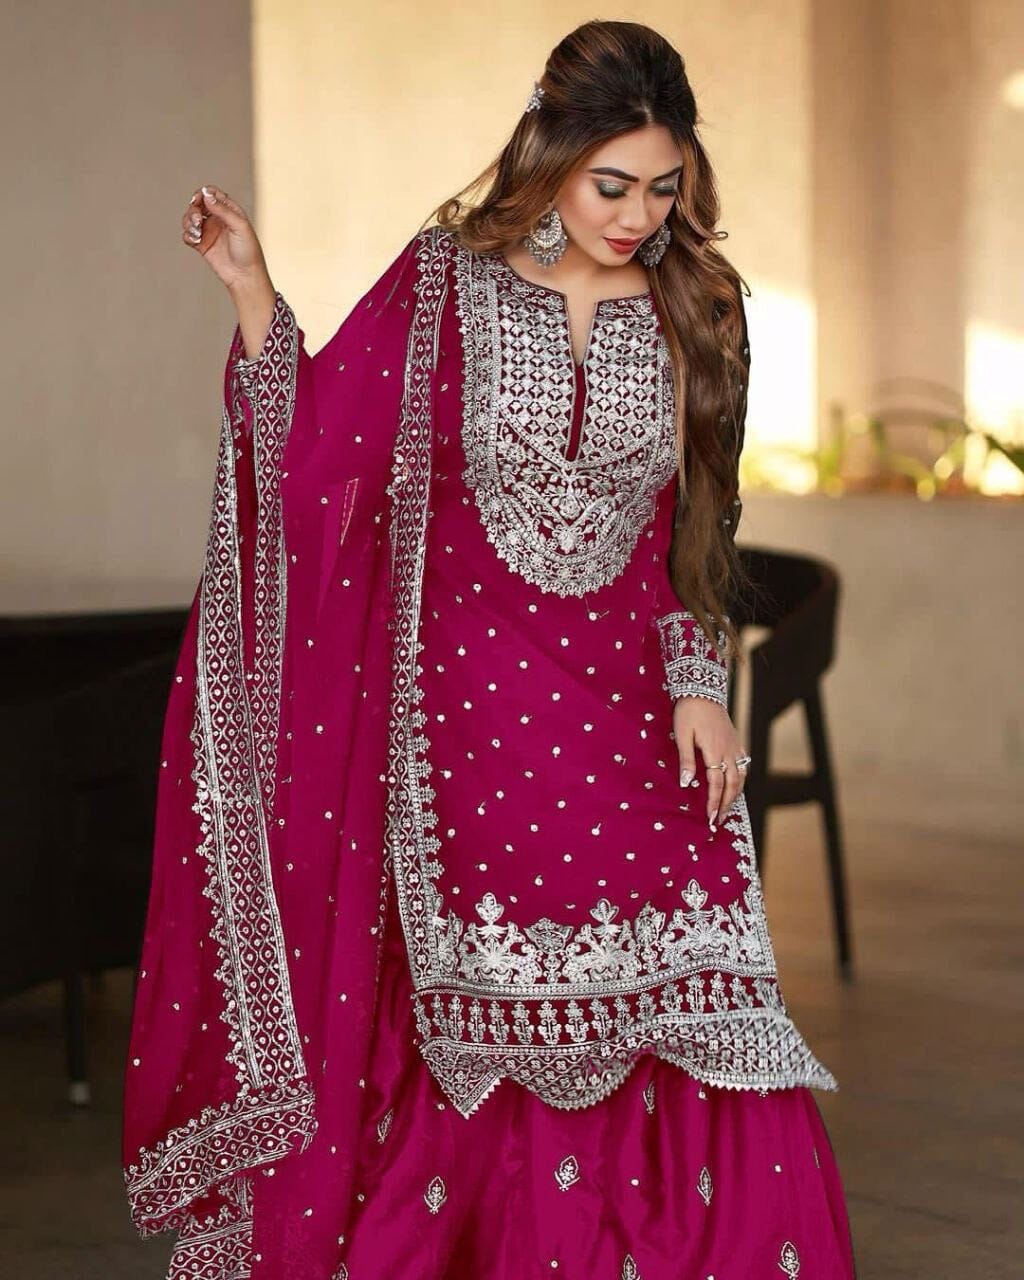 SSR 449 Heavy Embroidered Sequence work Designer Readymade Gharara Suit in 3 colors Ready Made Designer Suits Shopin Di Apparels 